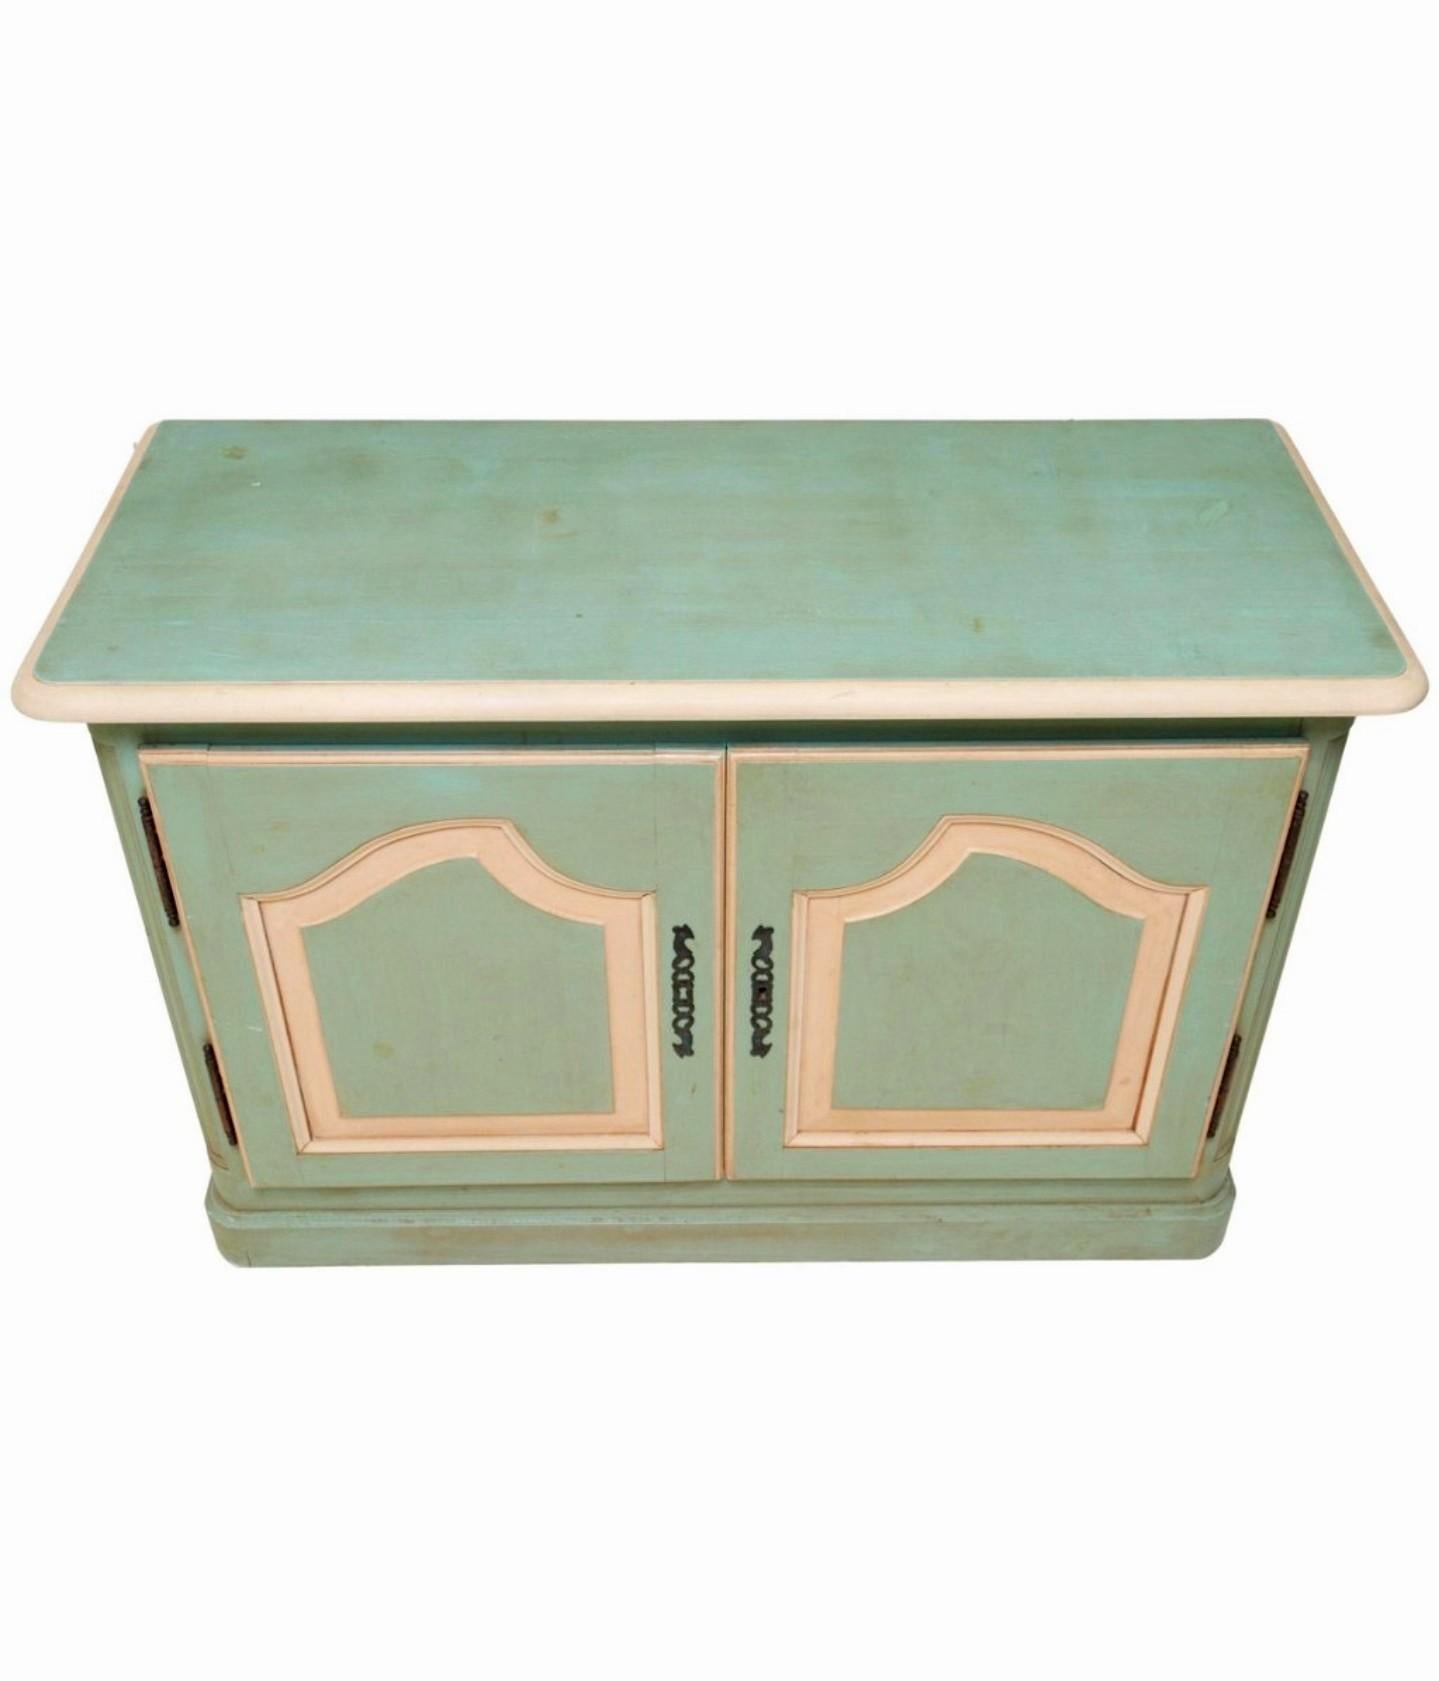 A charming vintage 18th century Louis XV style paint-decorated solid wood country French enfilade.

Born in France in the Mid-20th Century, featuring quality solid wood construction, painted soft warm light mint green and antique cream paint with